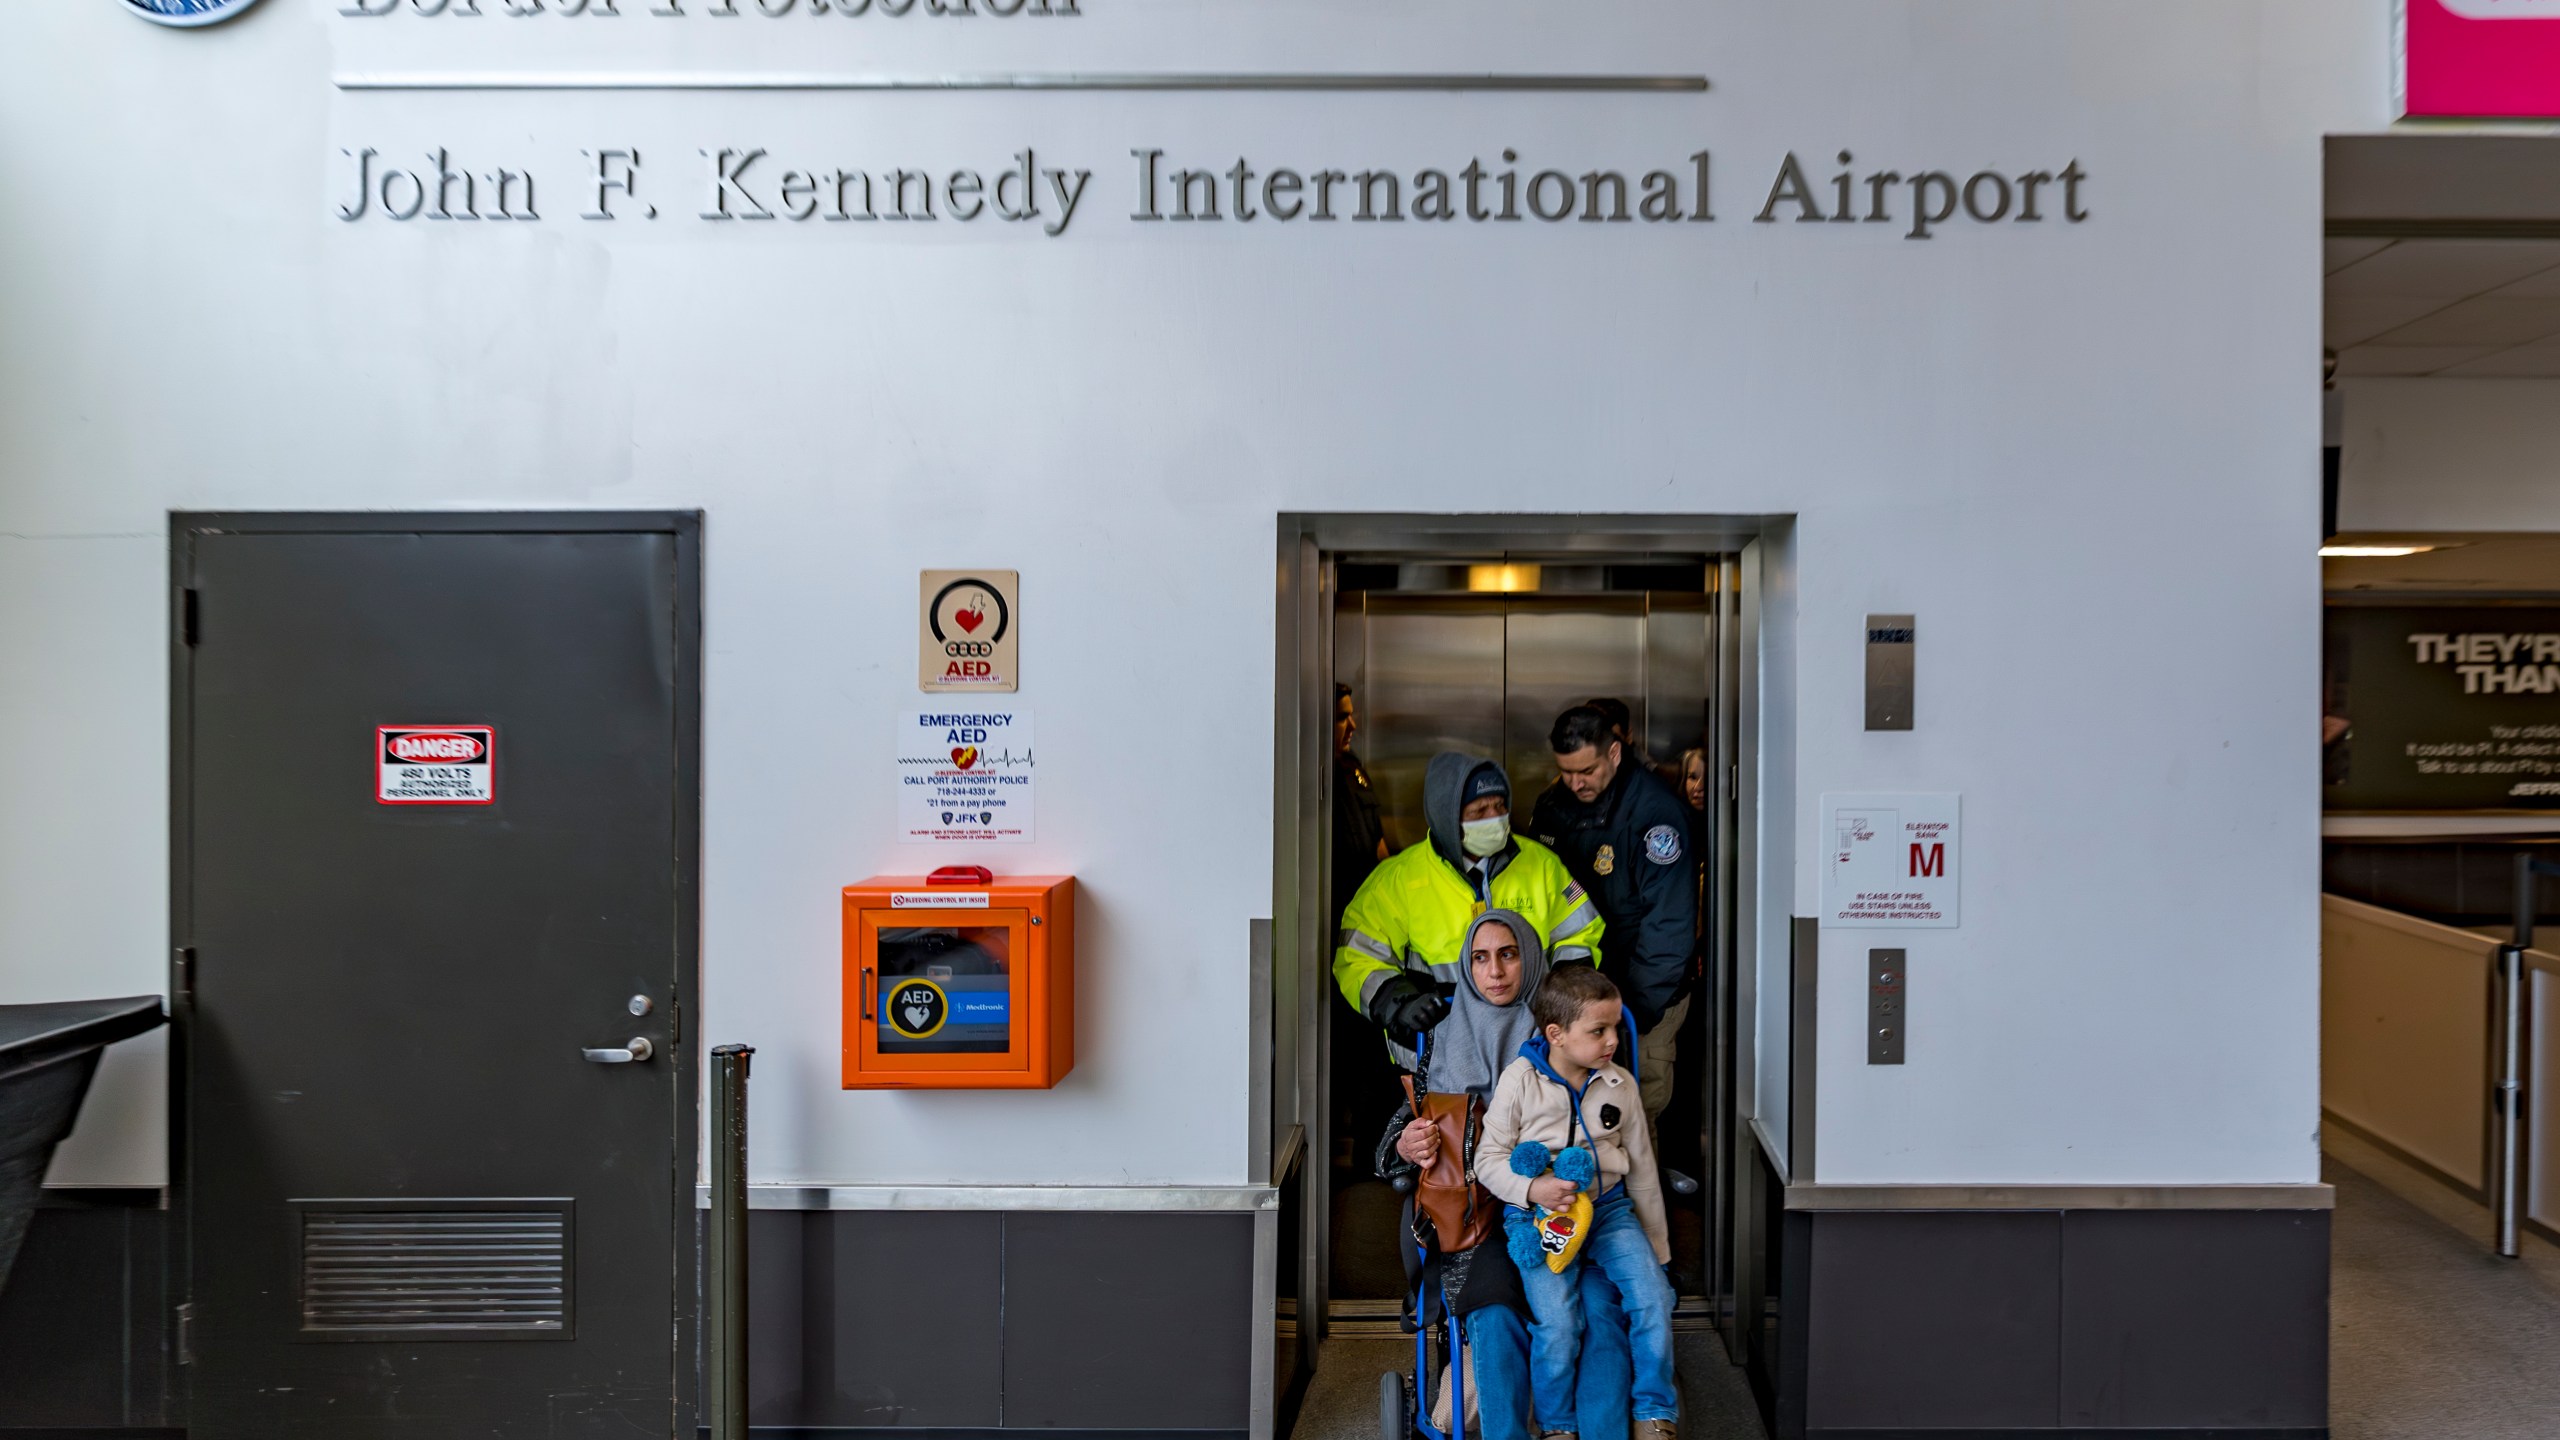 Four-year-old Omar Abu Kuwaik, and his aunt Maha Abu Kuwaik, both from Gaza, are escorted through John F. Kennedy International Airport after departing a flight from Egypt on Wednesday, Jan. 17, 2024, in New York. (AP Photo/Peter K. Afriyie)